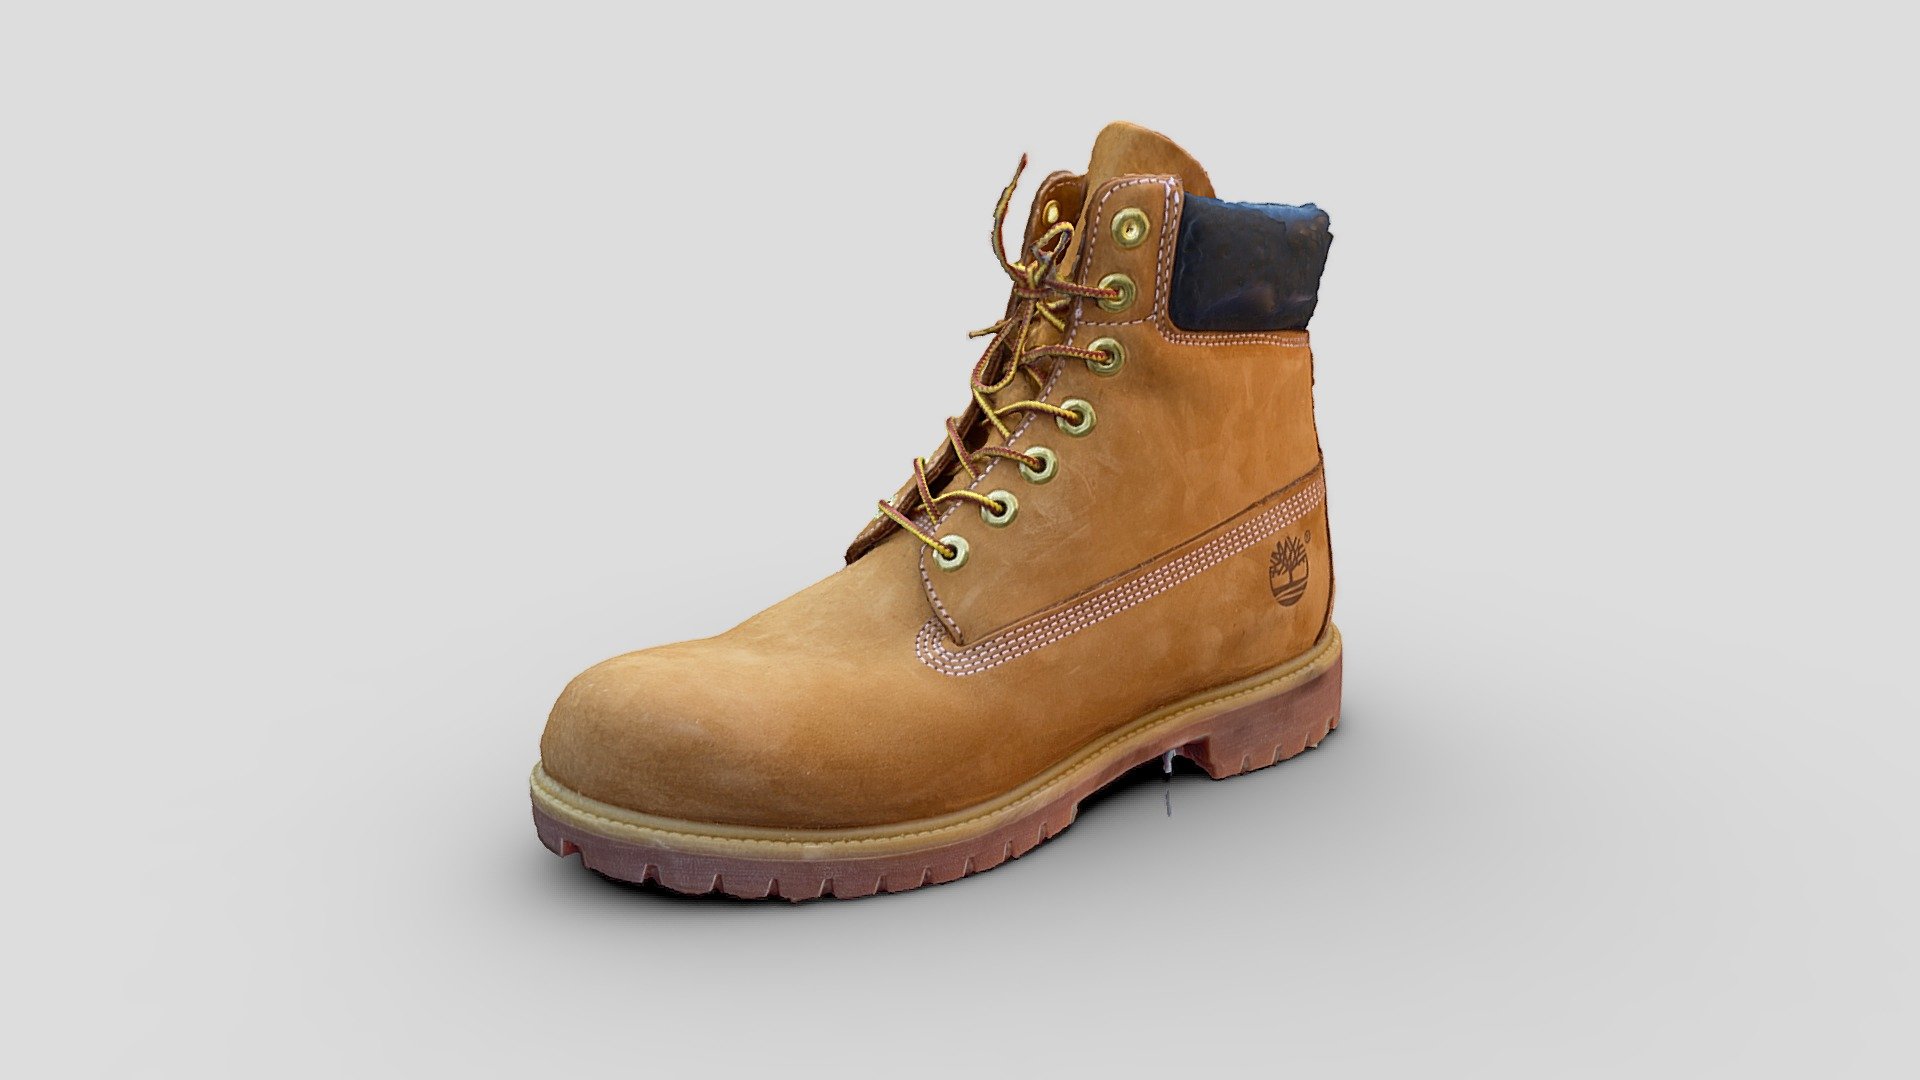 ~160 photos captured and processed with RealityScan - Timberland boot - 3D model by alban 3d model